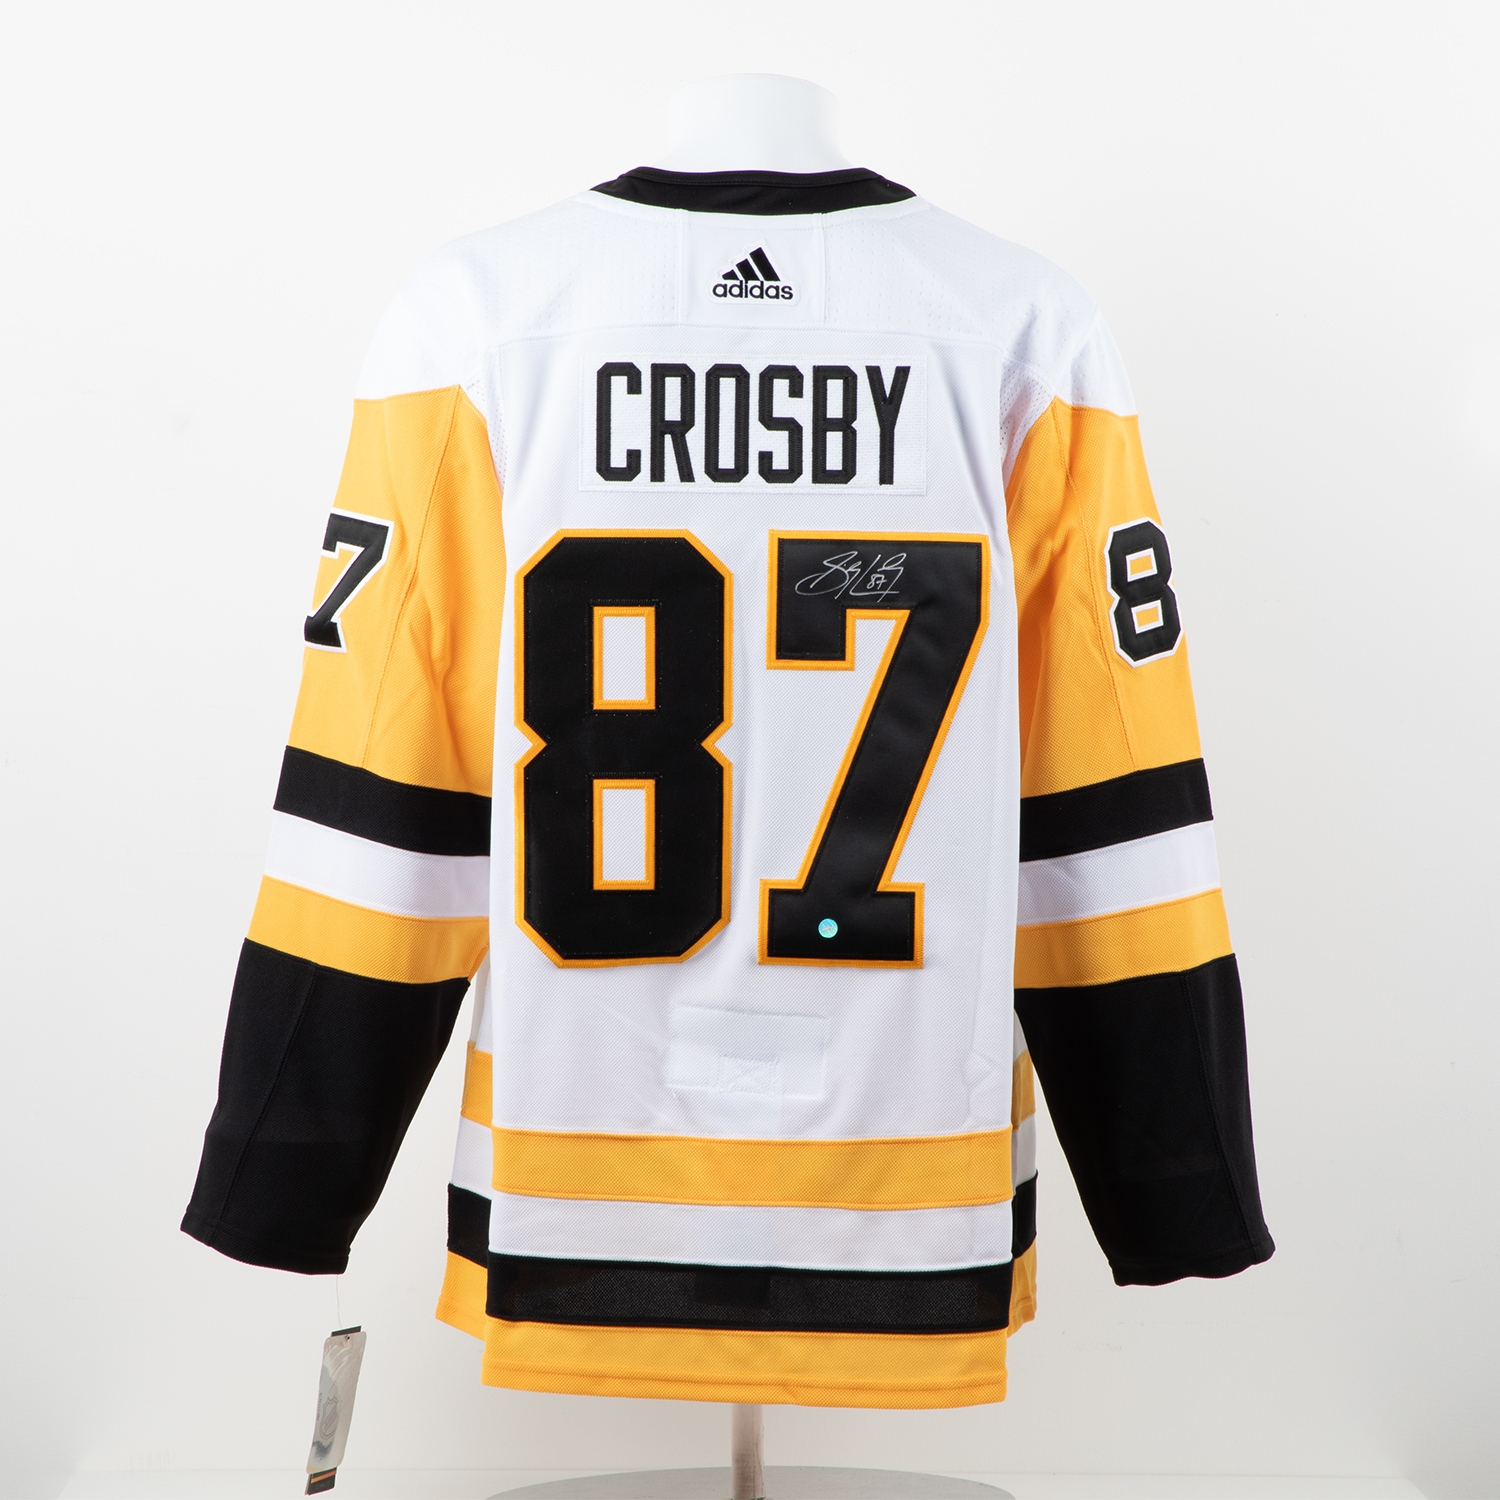 Sidney Crosby Autographed Pittsburgh Penguins Adidas Hockey Jersey